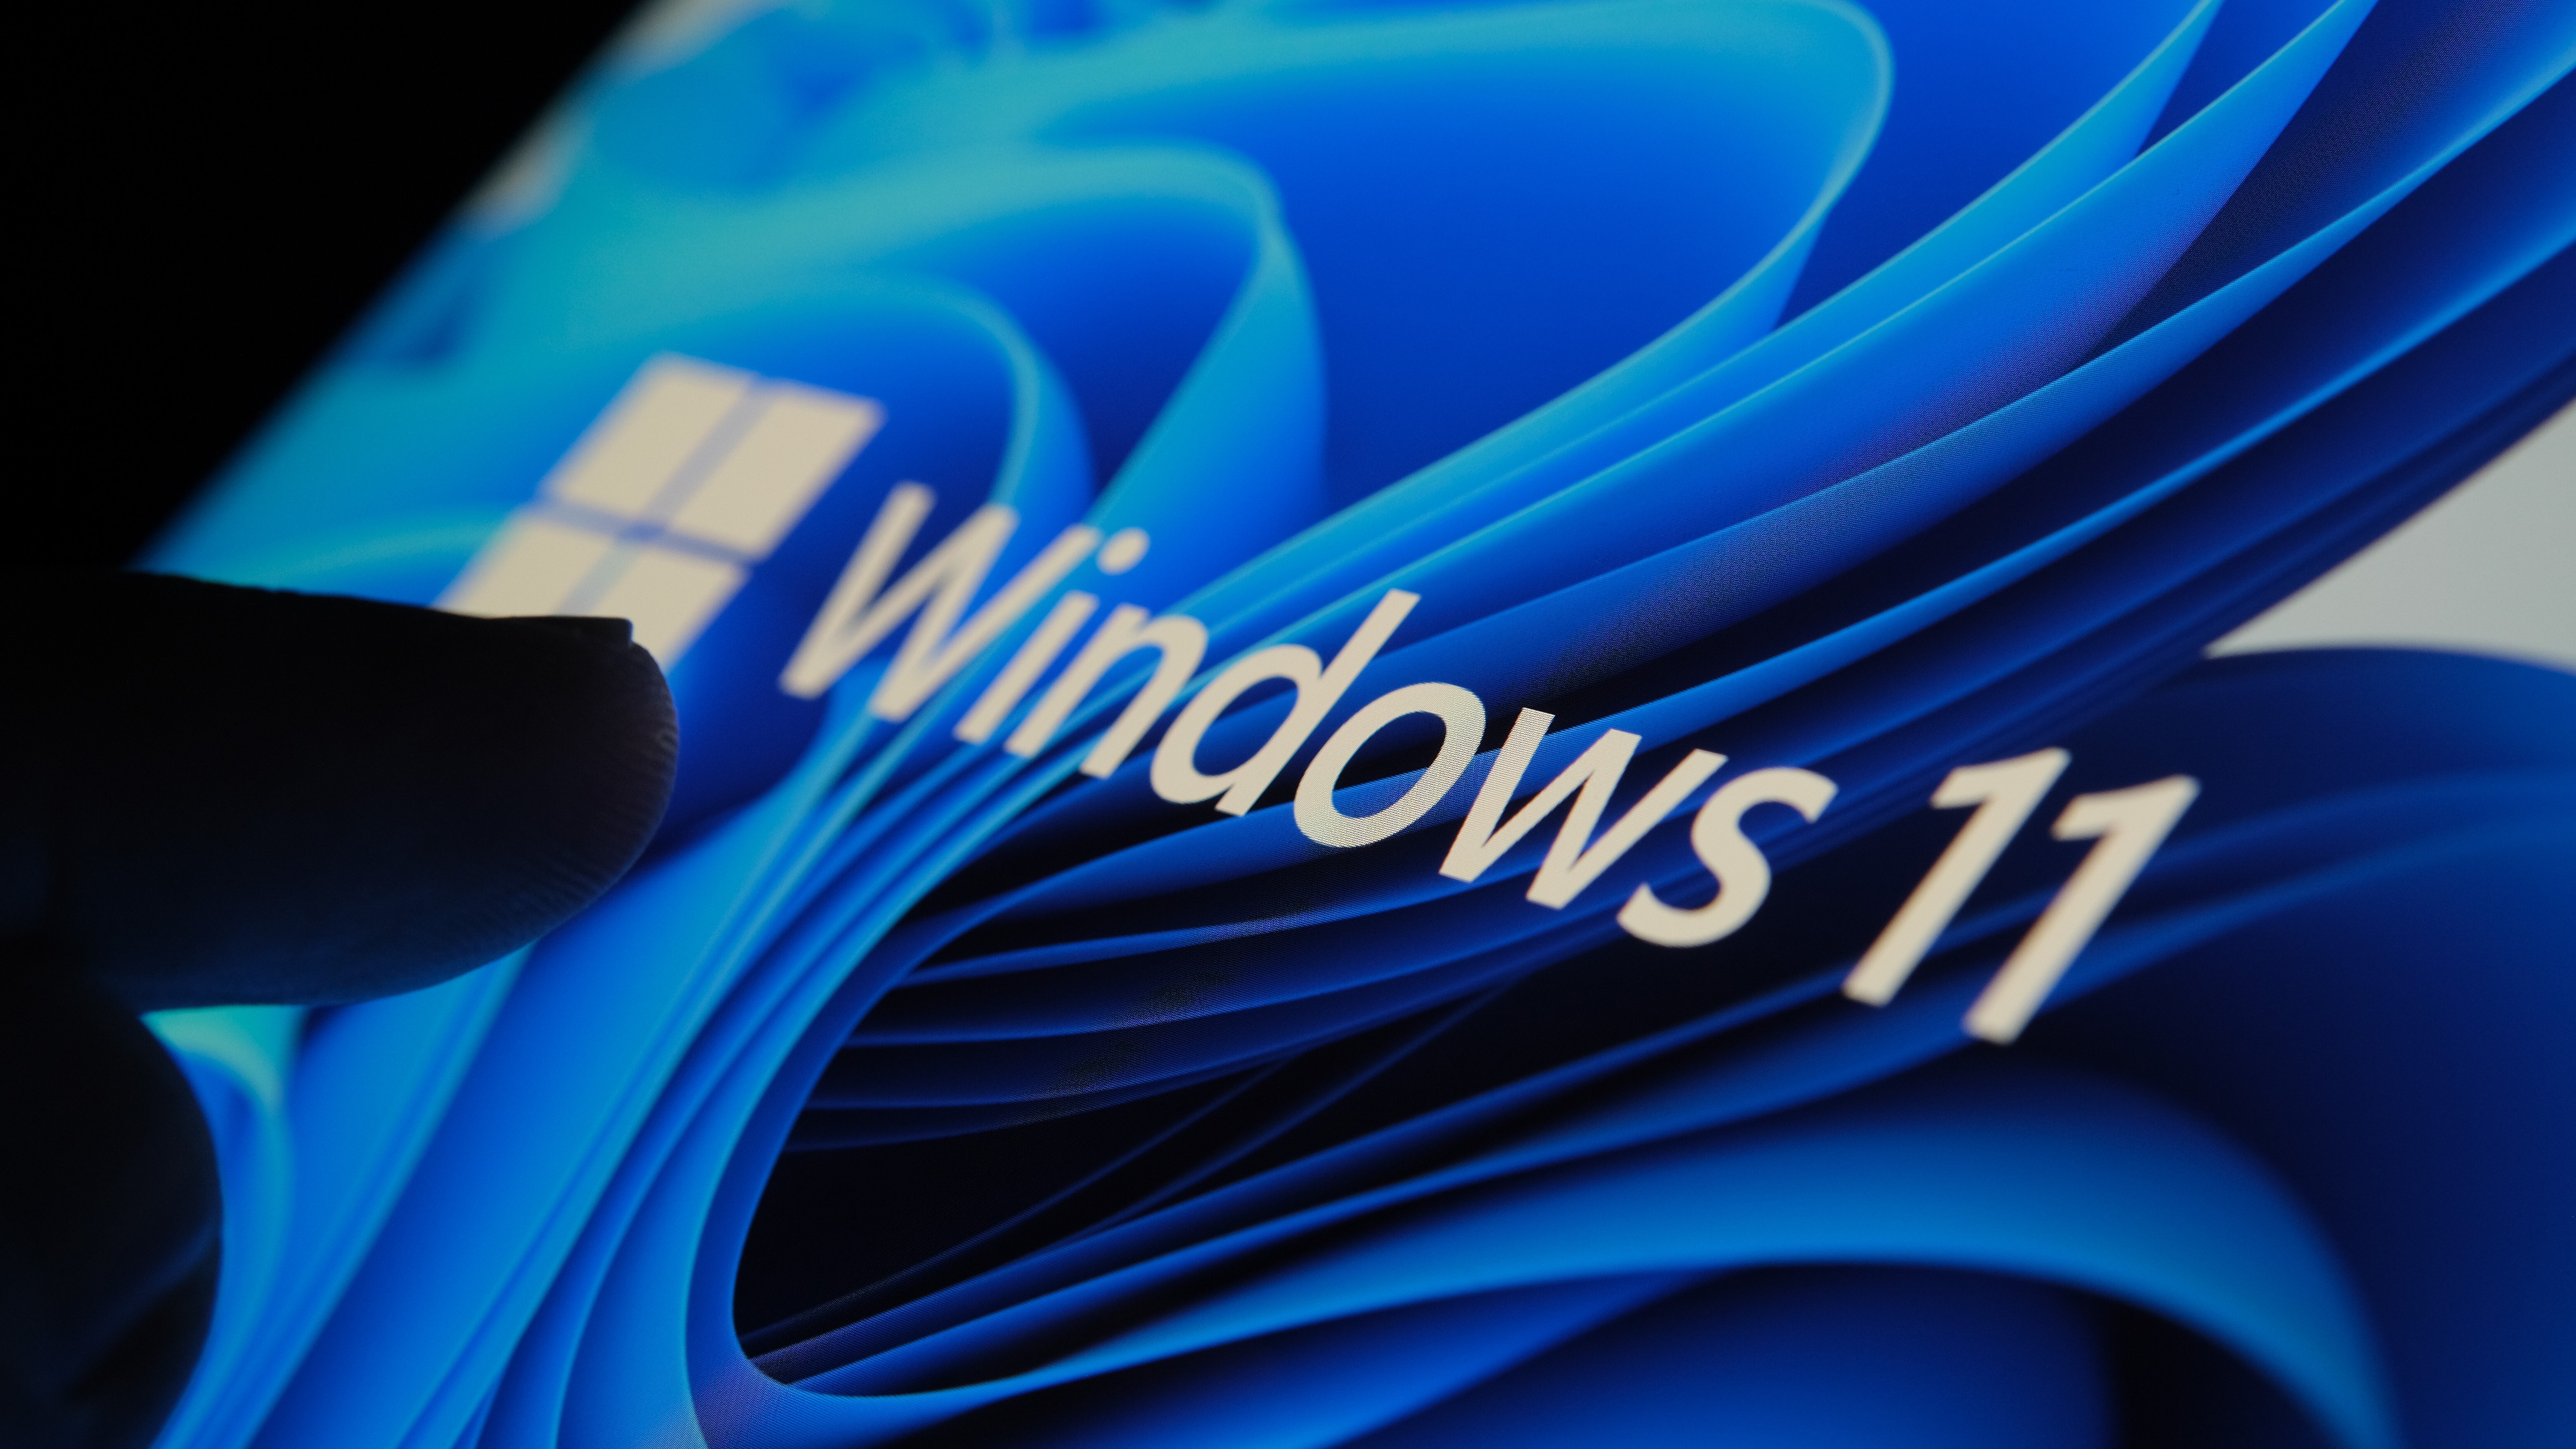 How to install Windows 11 23H2, now available for everyone